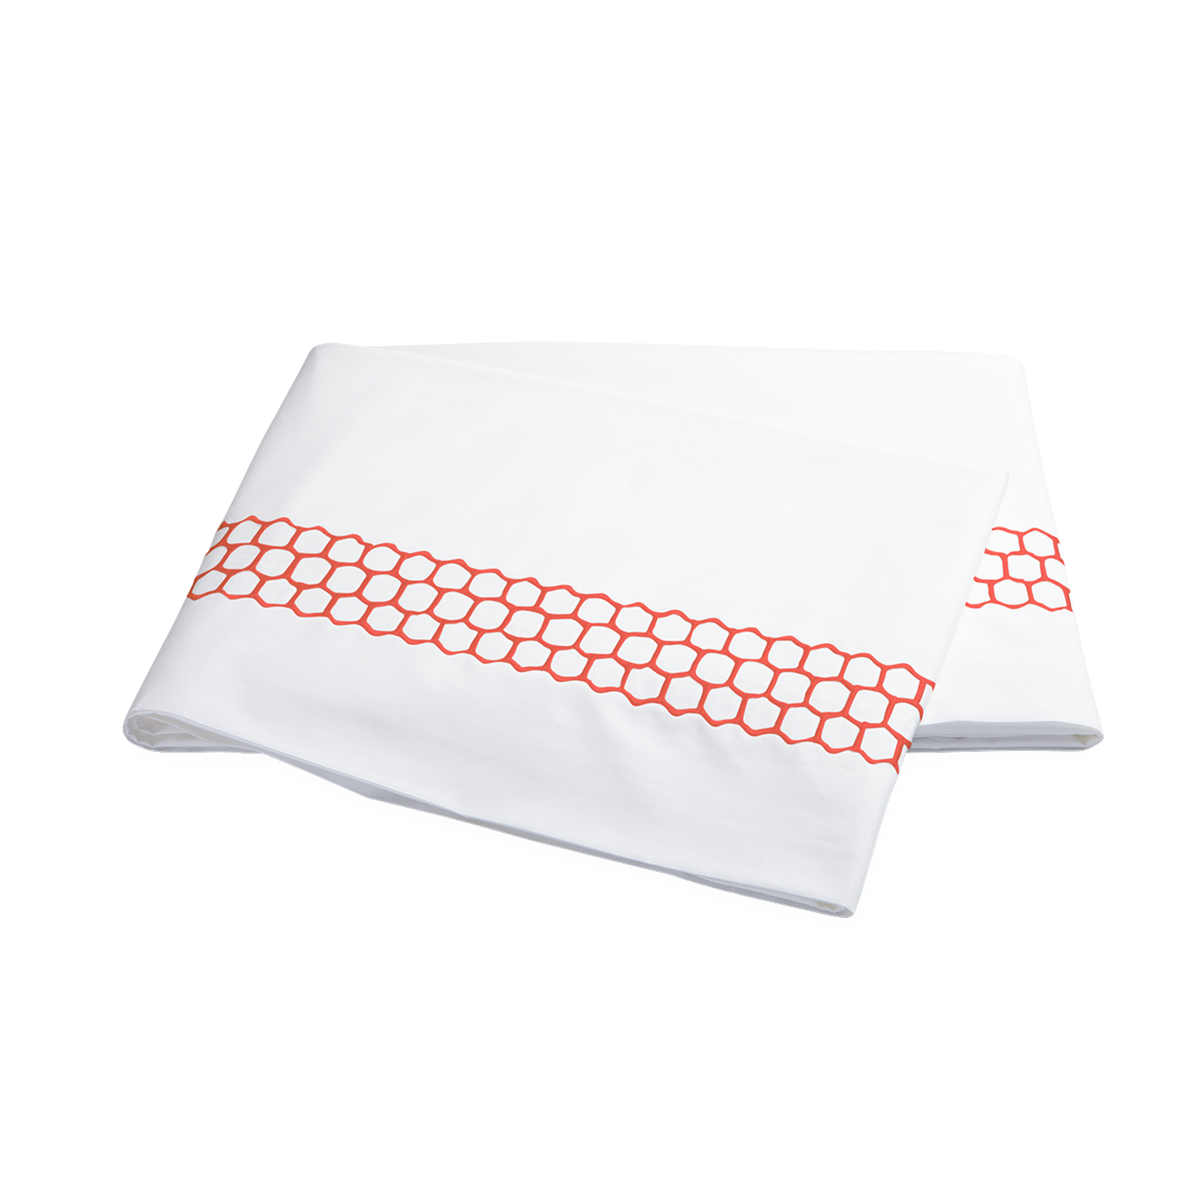 Clear Image of Matouk Liana Bedding Flat Sheet in Coral Color